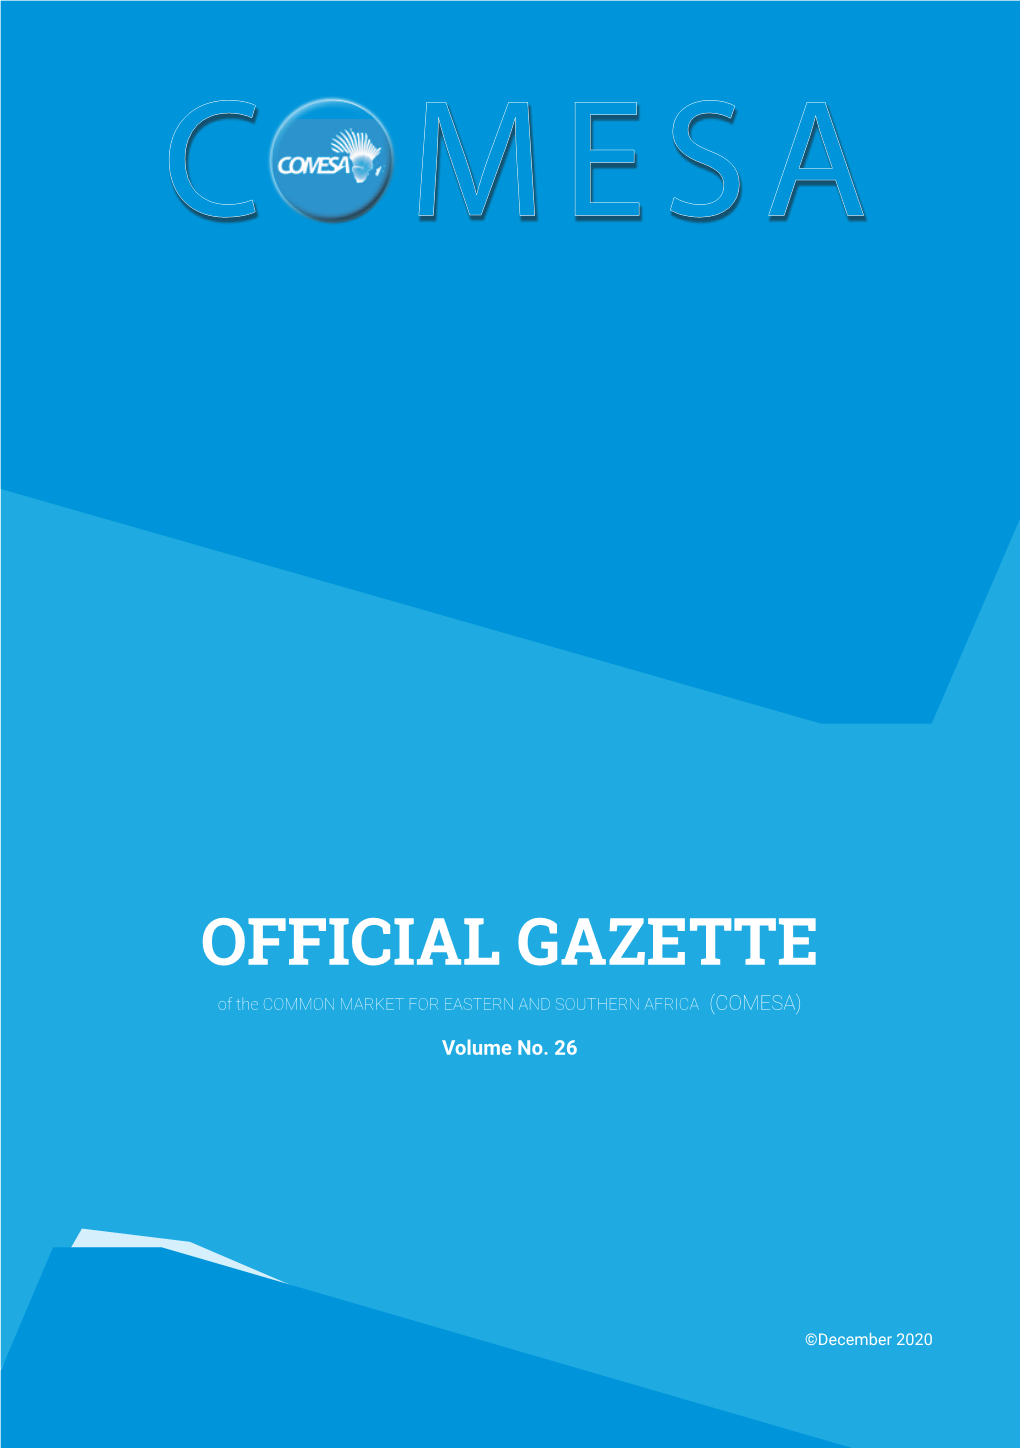 OFFICIAL GAZETTE of the COMMON MARKET for EASTERN and SOUTHERN AFRICA (COMESA)